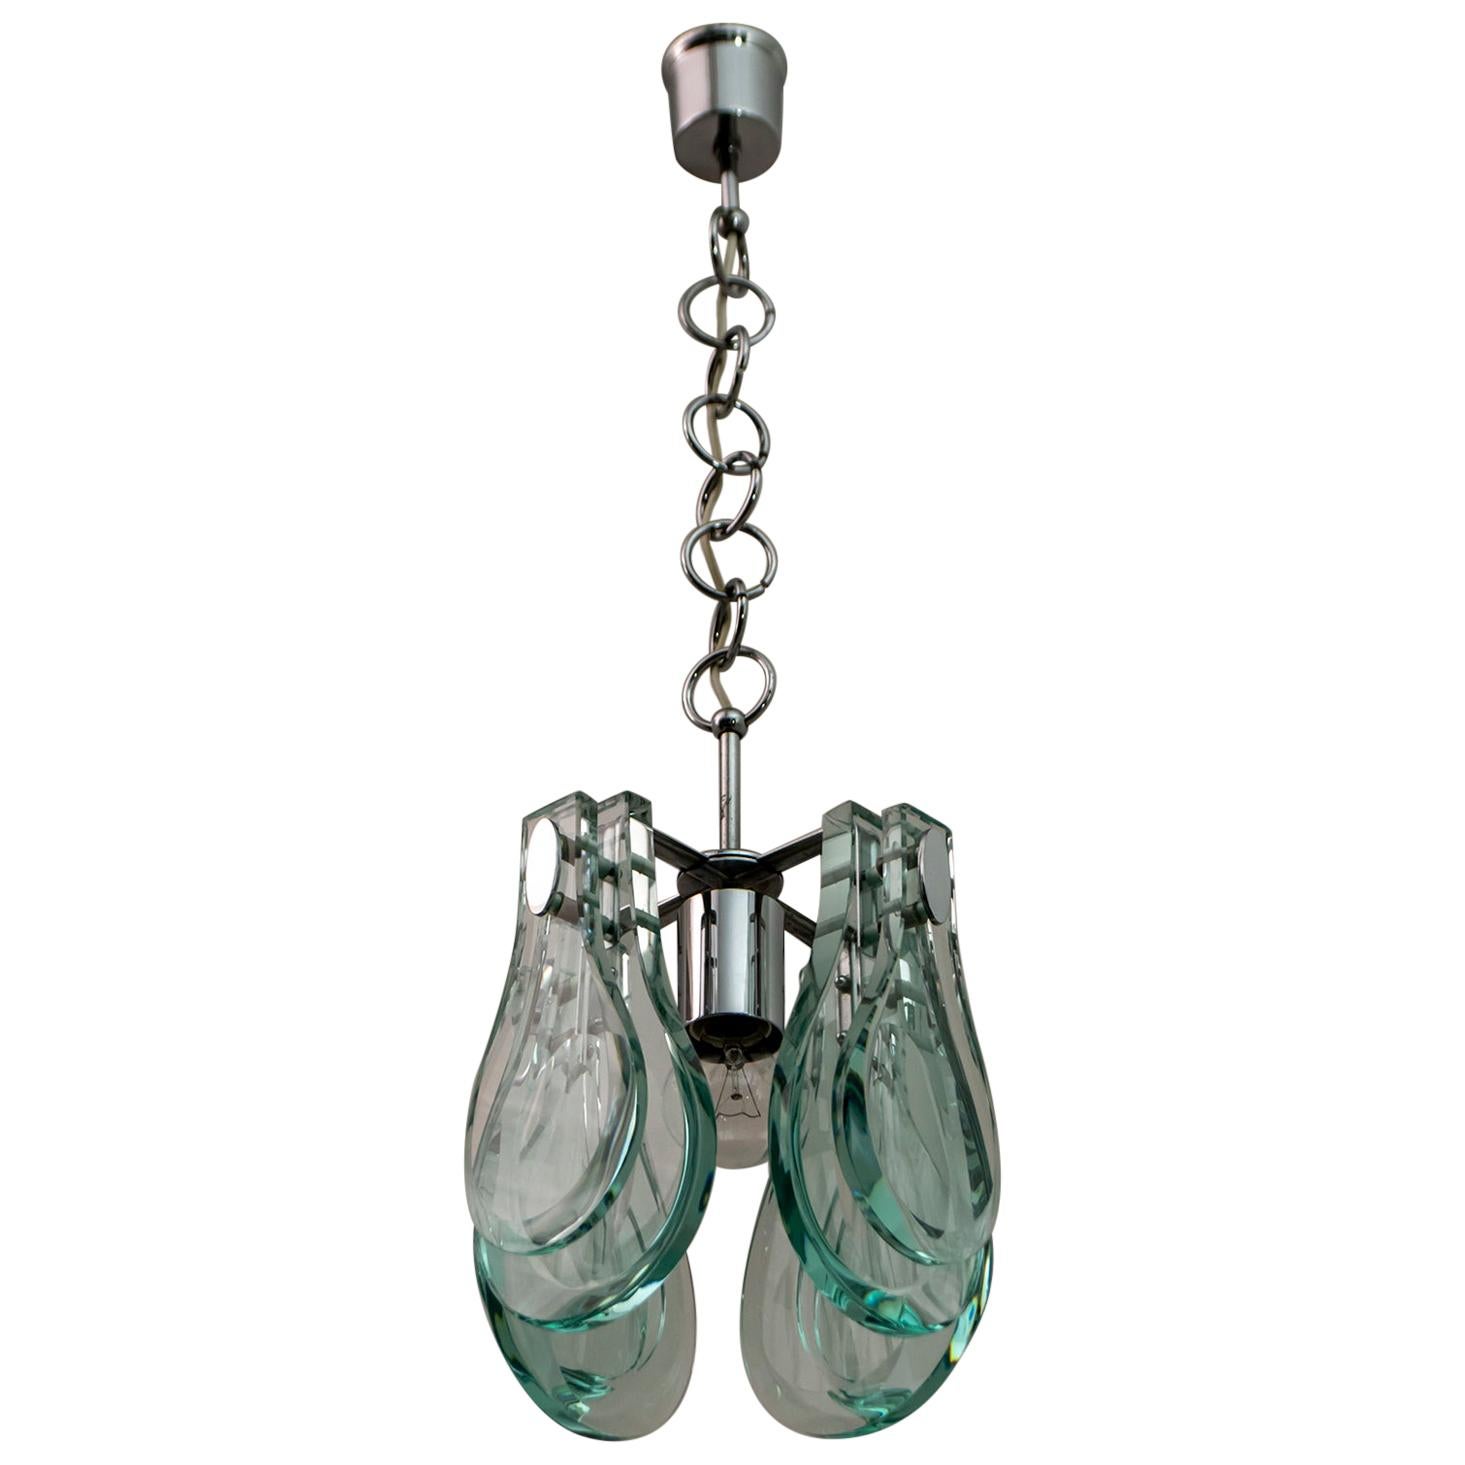 Mid-Century Modern Italian Chrome and Thick Glass Pendant by Veca, 1960s